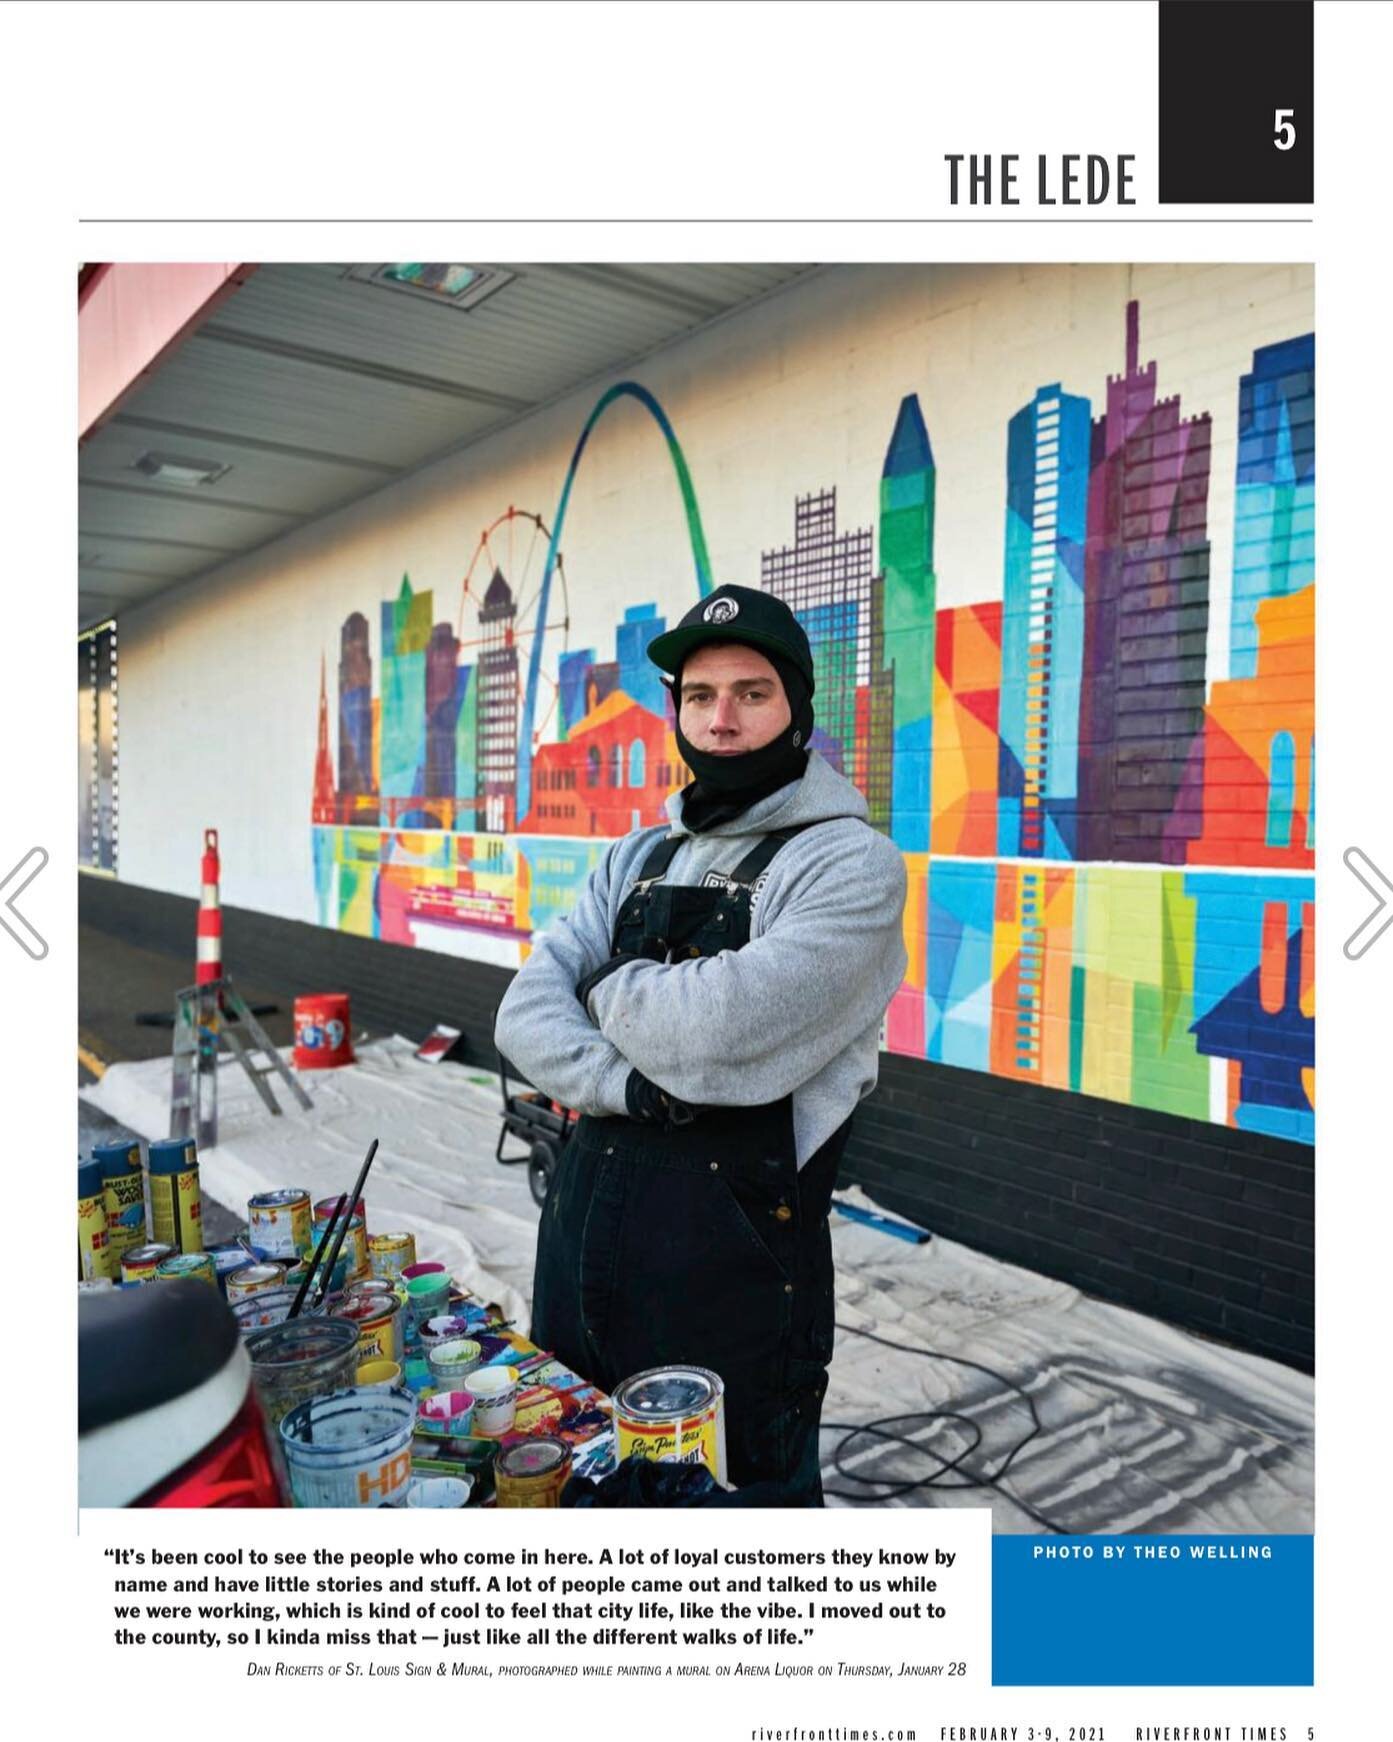 Made it to the RFT this week!!!! 📸Photo and interview by @theorwelling 

#stlouissignandmural #riverfronttimes #arenaliquor #mural #press #stlouisartist #stlouis #artscene #1shotpaint #stlsignandmural #theowelling #photography